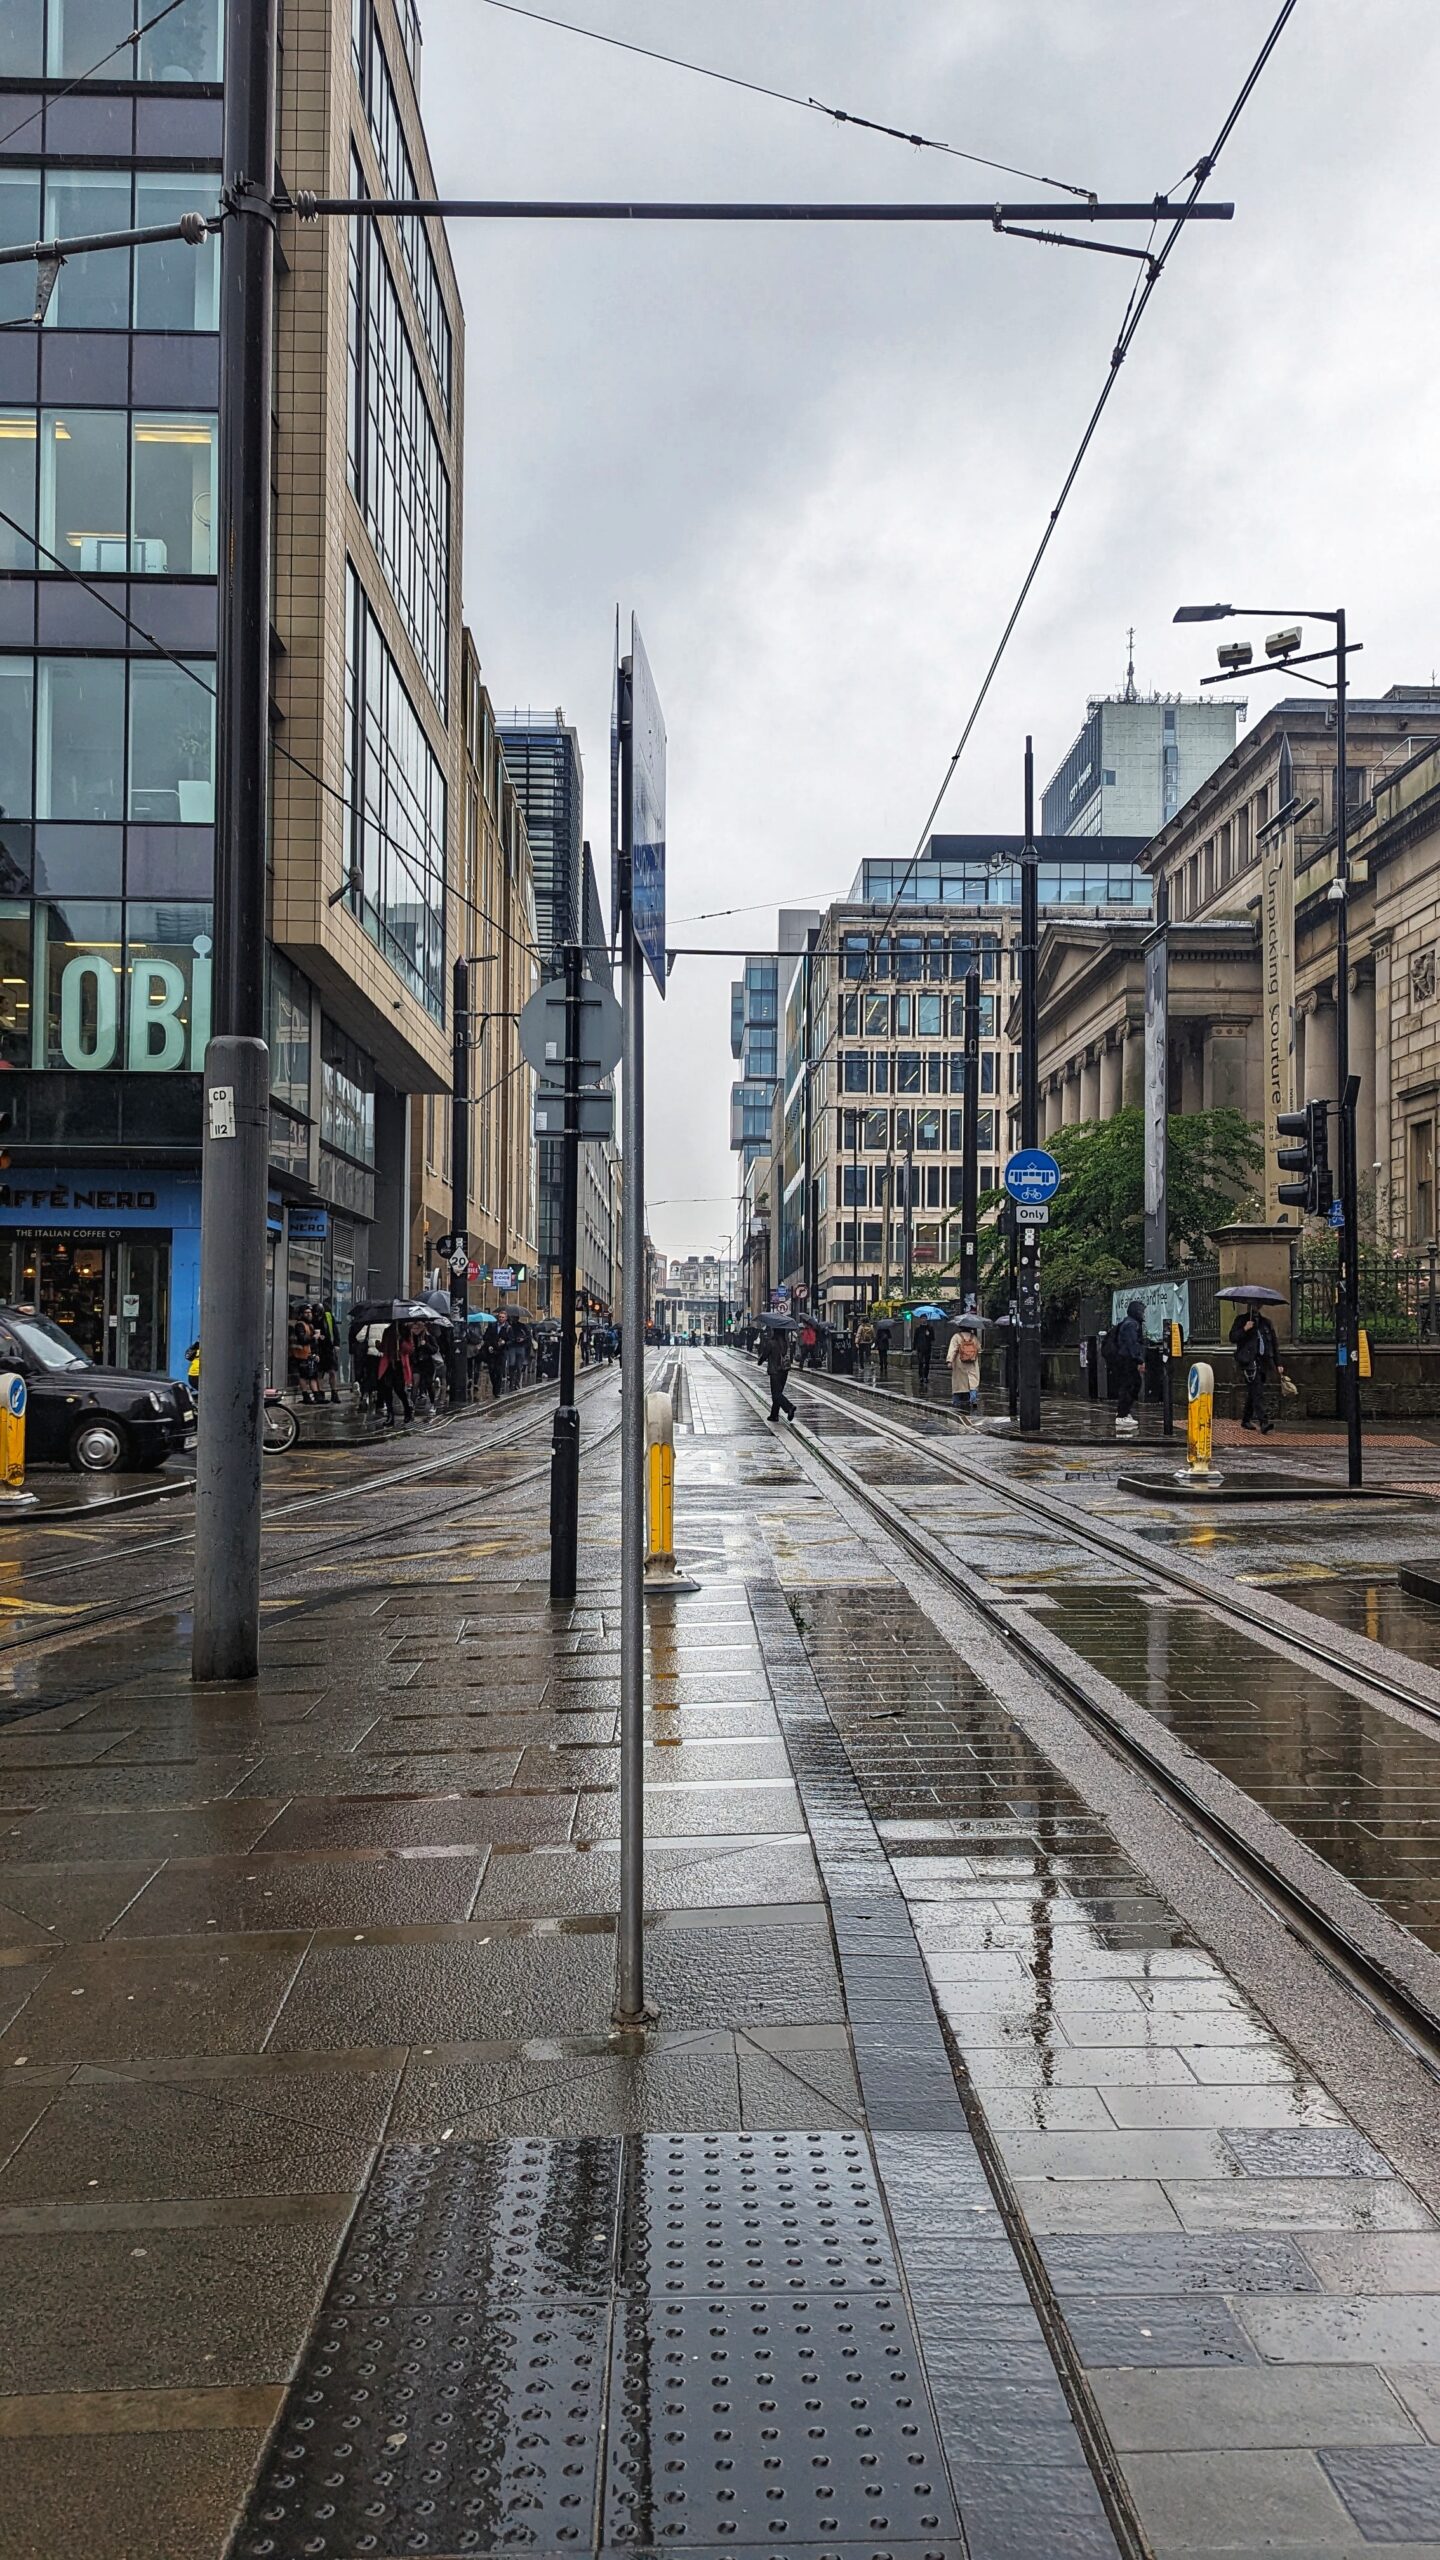 A drone display has been cancelled as Manchester has been placed under an amber weather alert for heavy rain. Credit: The Manc Group